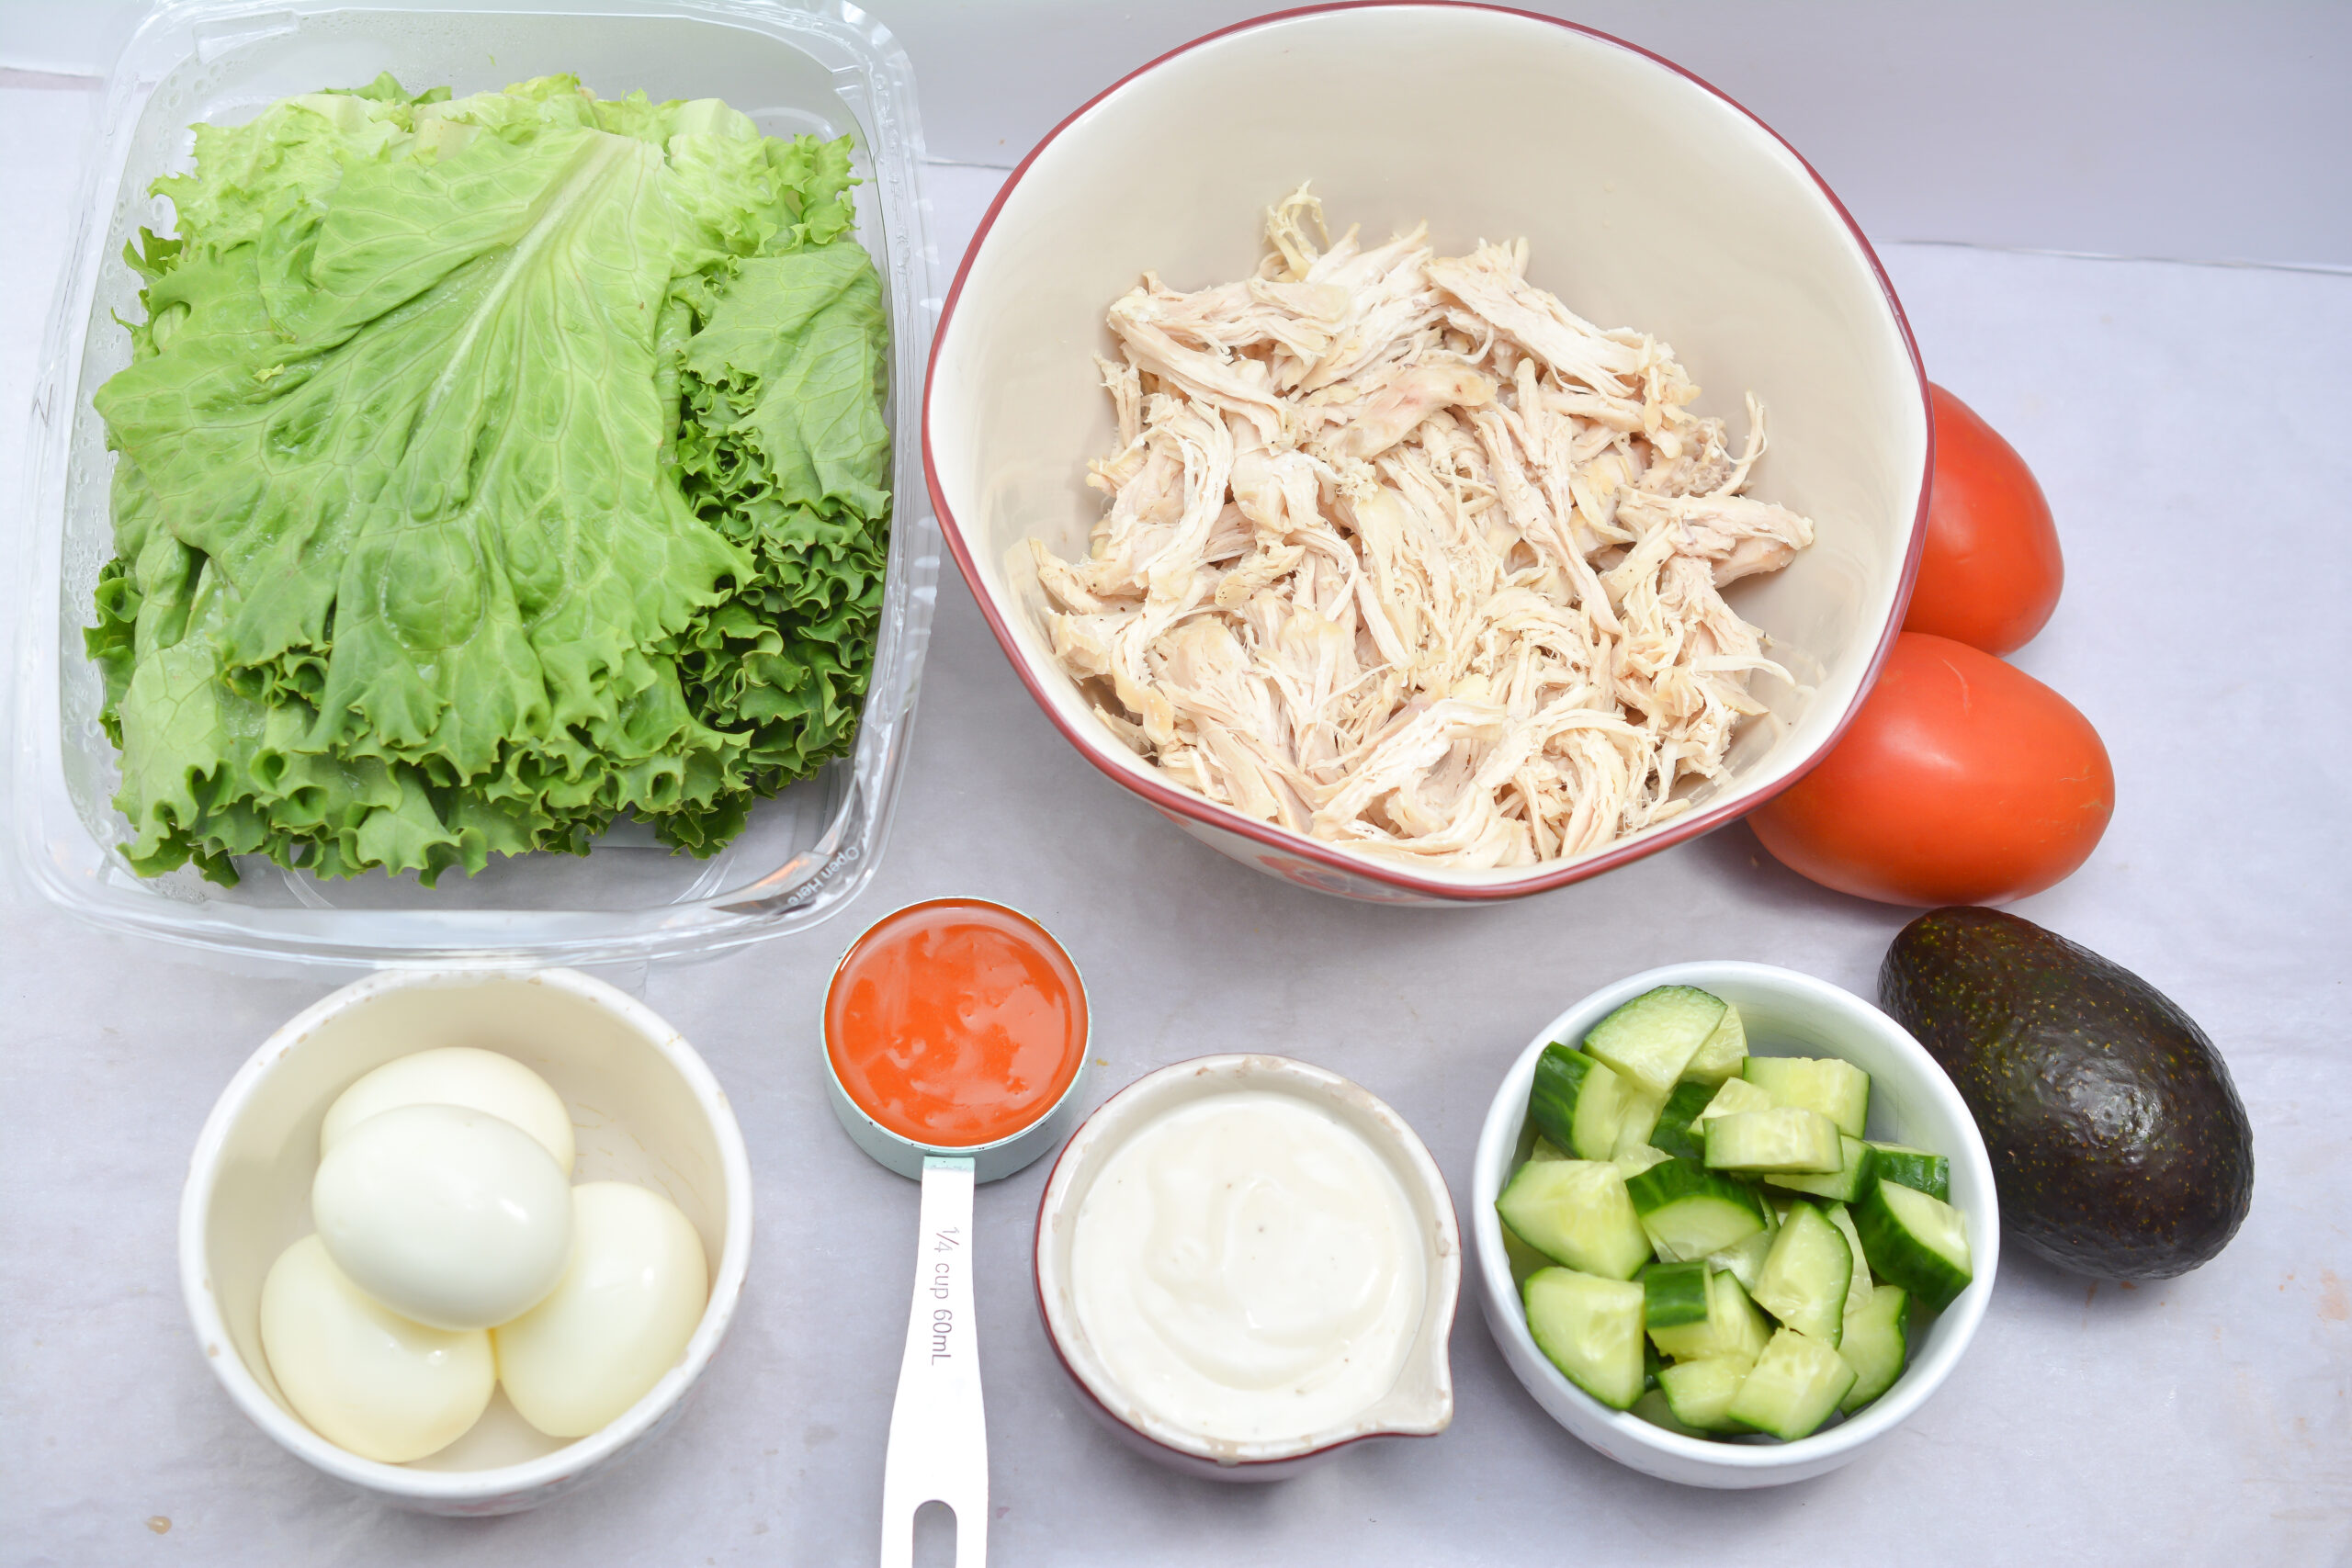 Ingredients for Buffalo Chicken Cobb Salad.